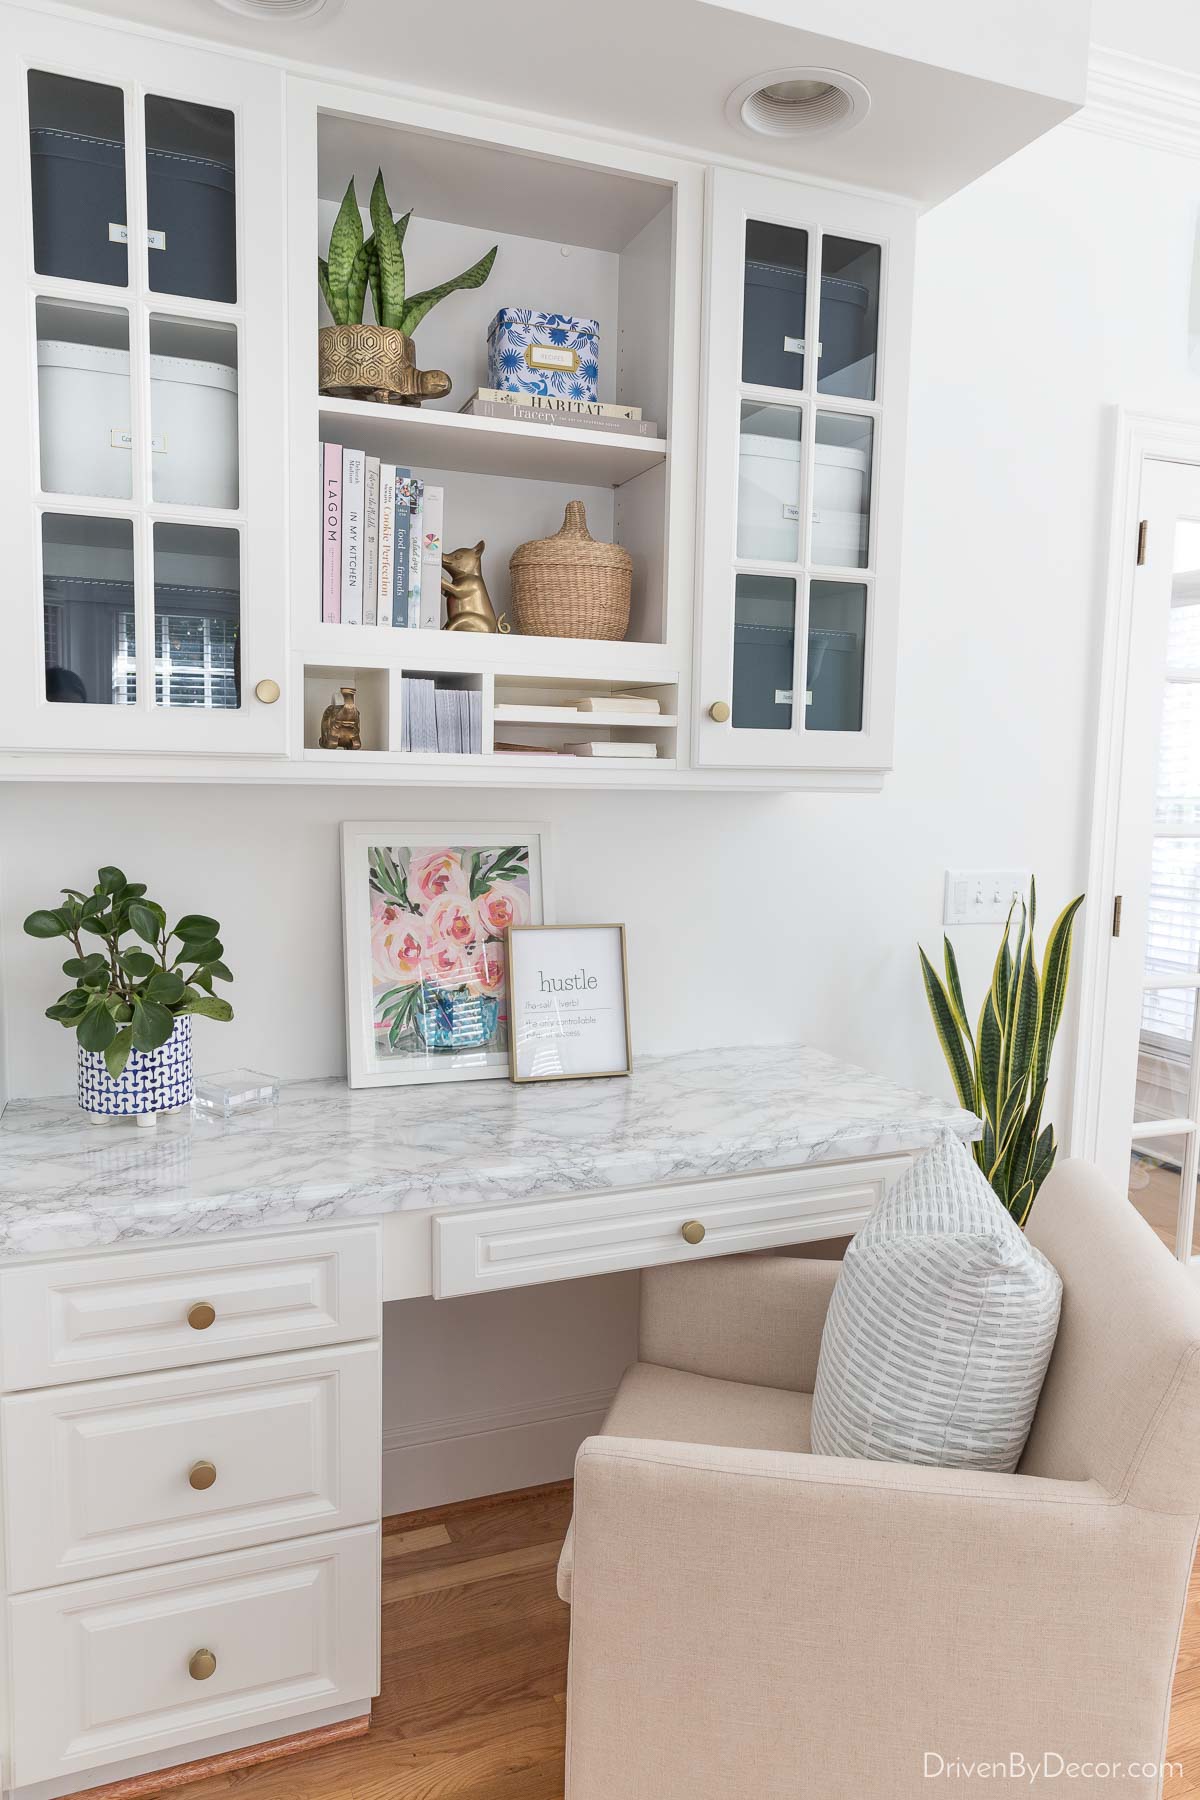 I dressed up our kitchen desk area with marble contact paper countertops!